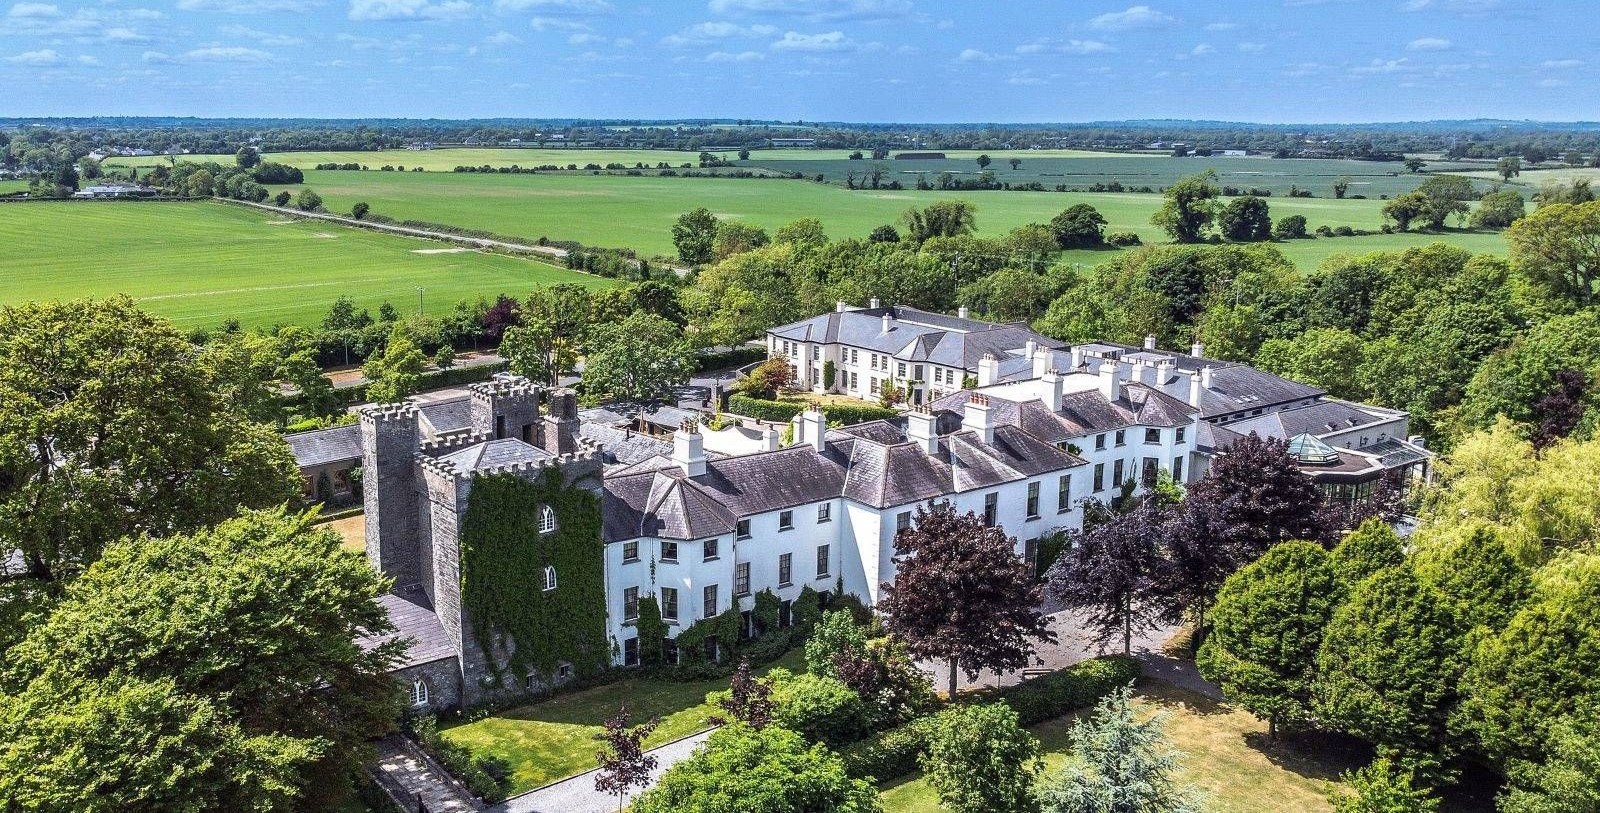 Spend a half-day touring the nearby Castledown House and historic sites in Ireland's Ancient East.